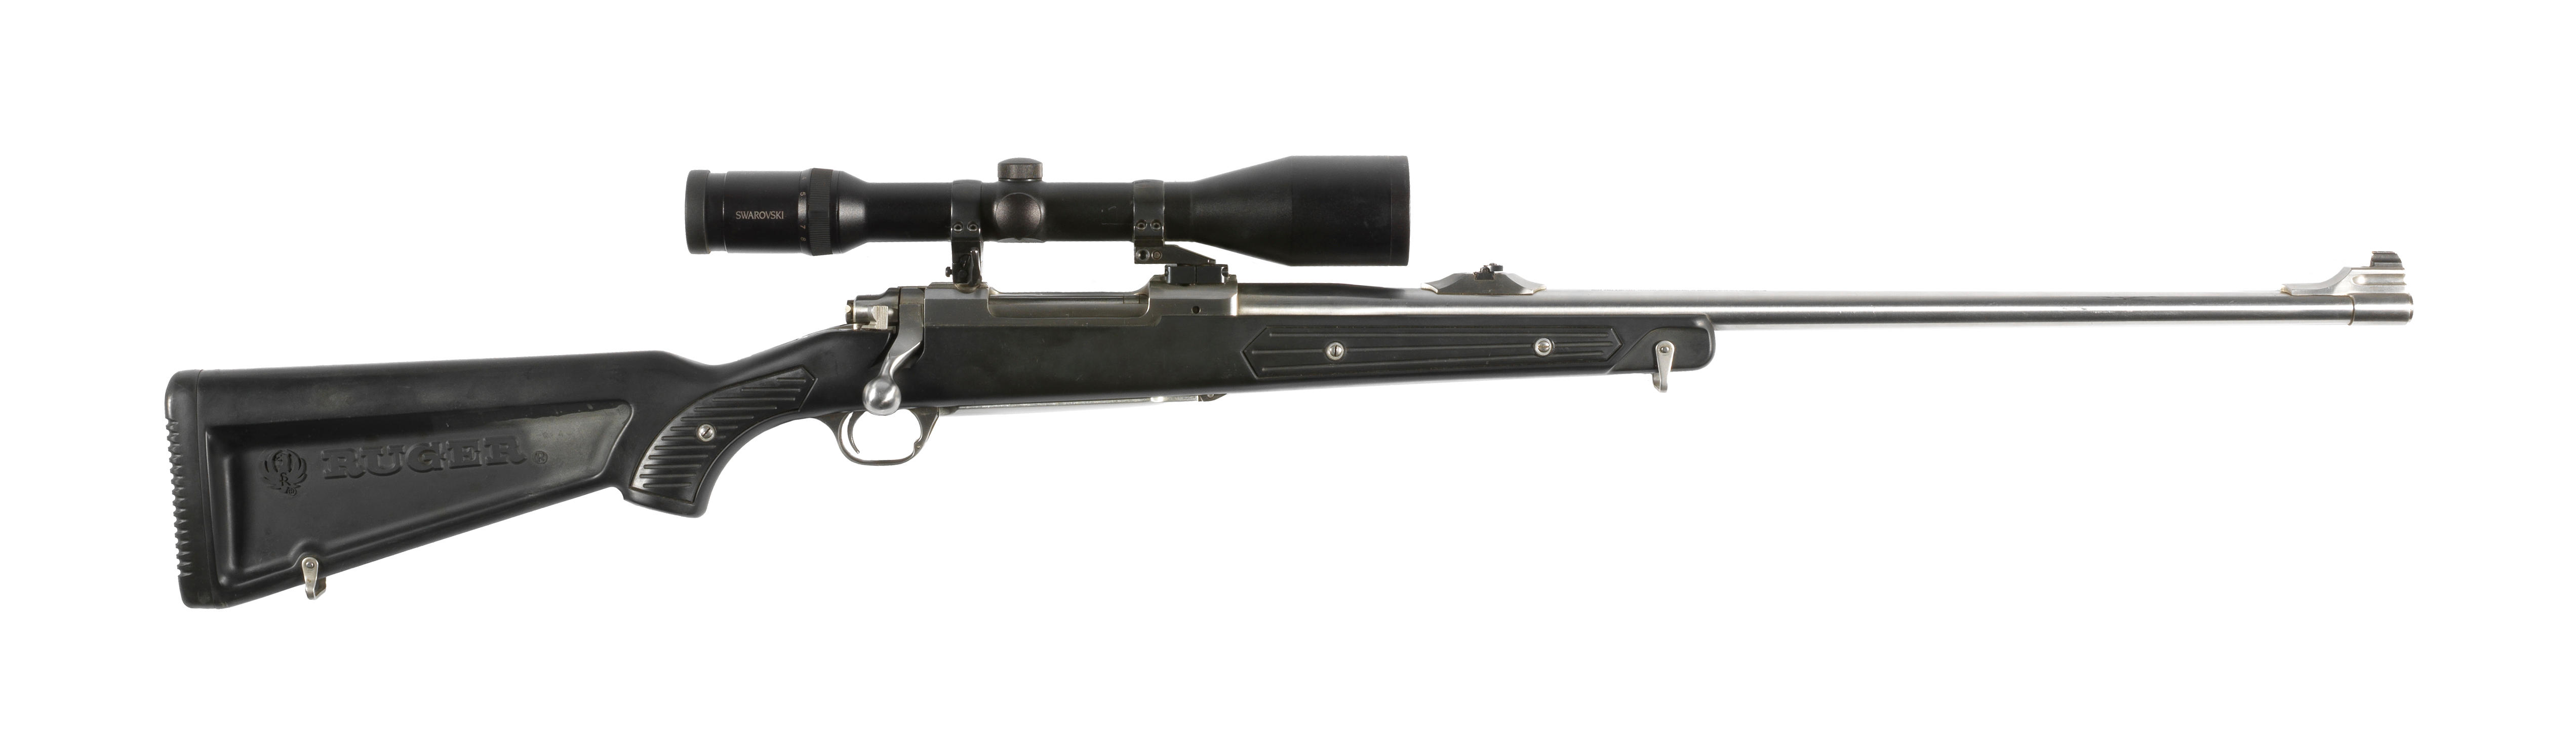 A .300 (Win Mag) 'M77 Mark II' sporting rifle by Sturm, Ruger &am...